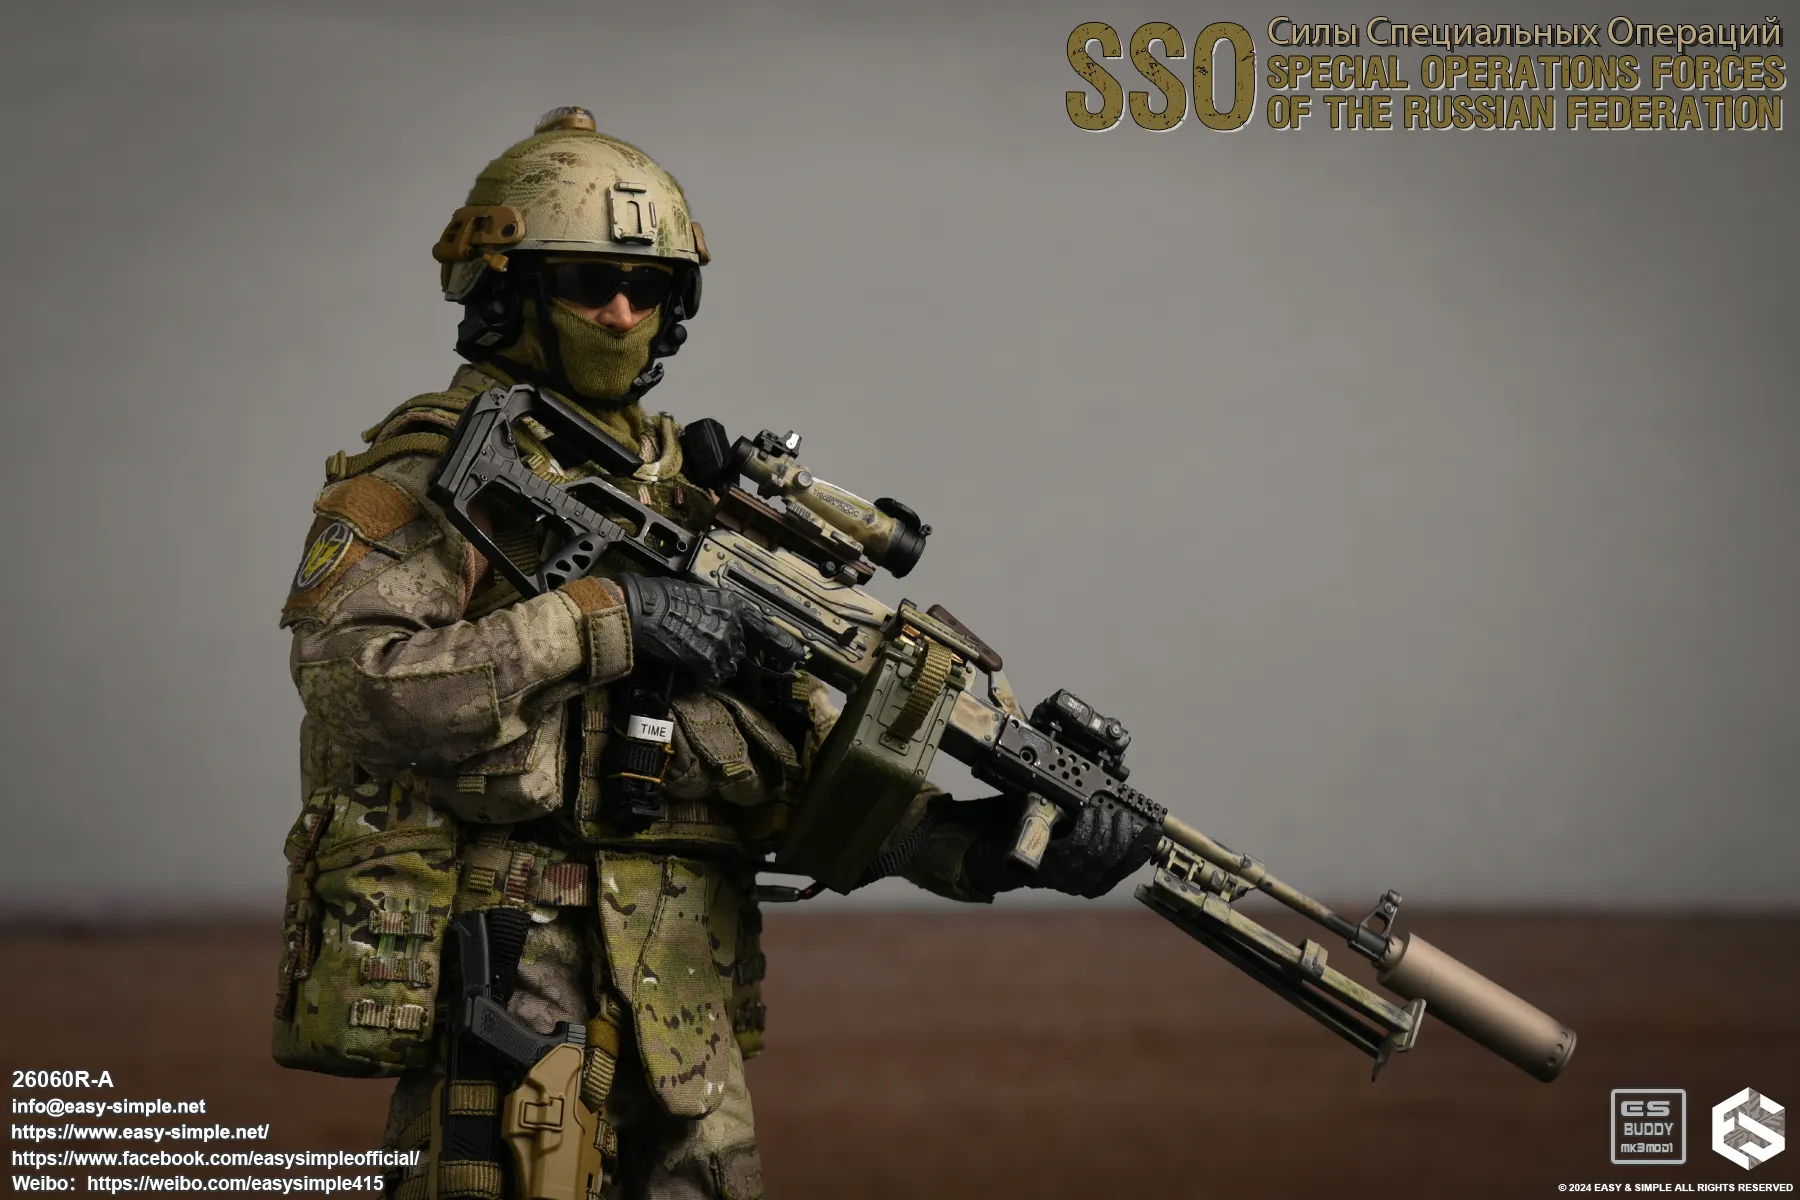 NEW PRODUCT: Easy&Simple 26060R-A Russian Special Operations Forces (SSO) Format,webp